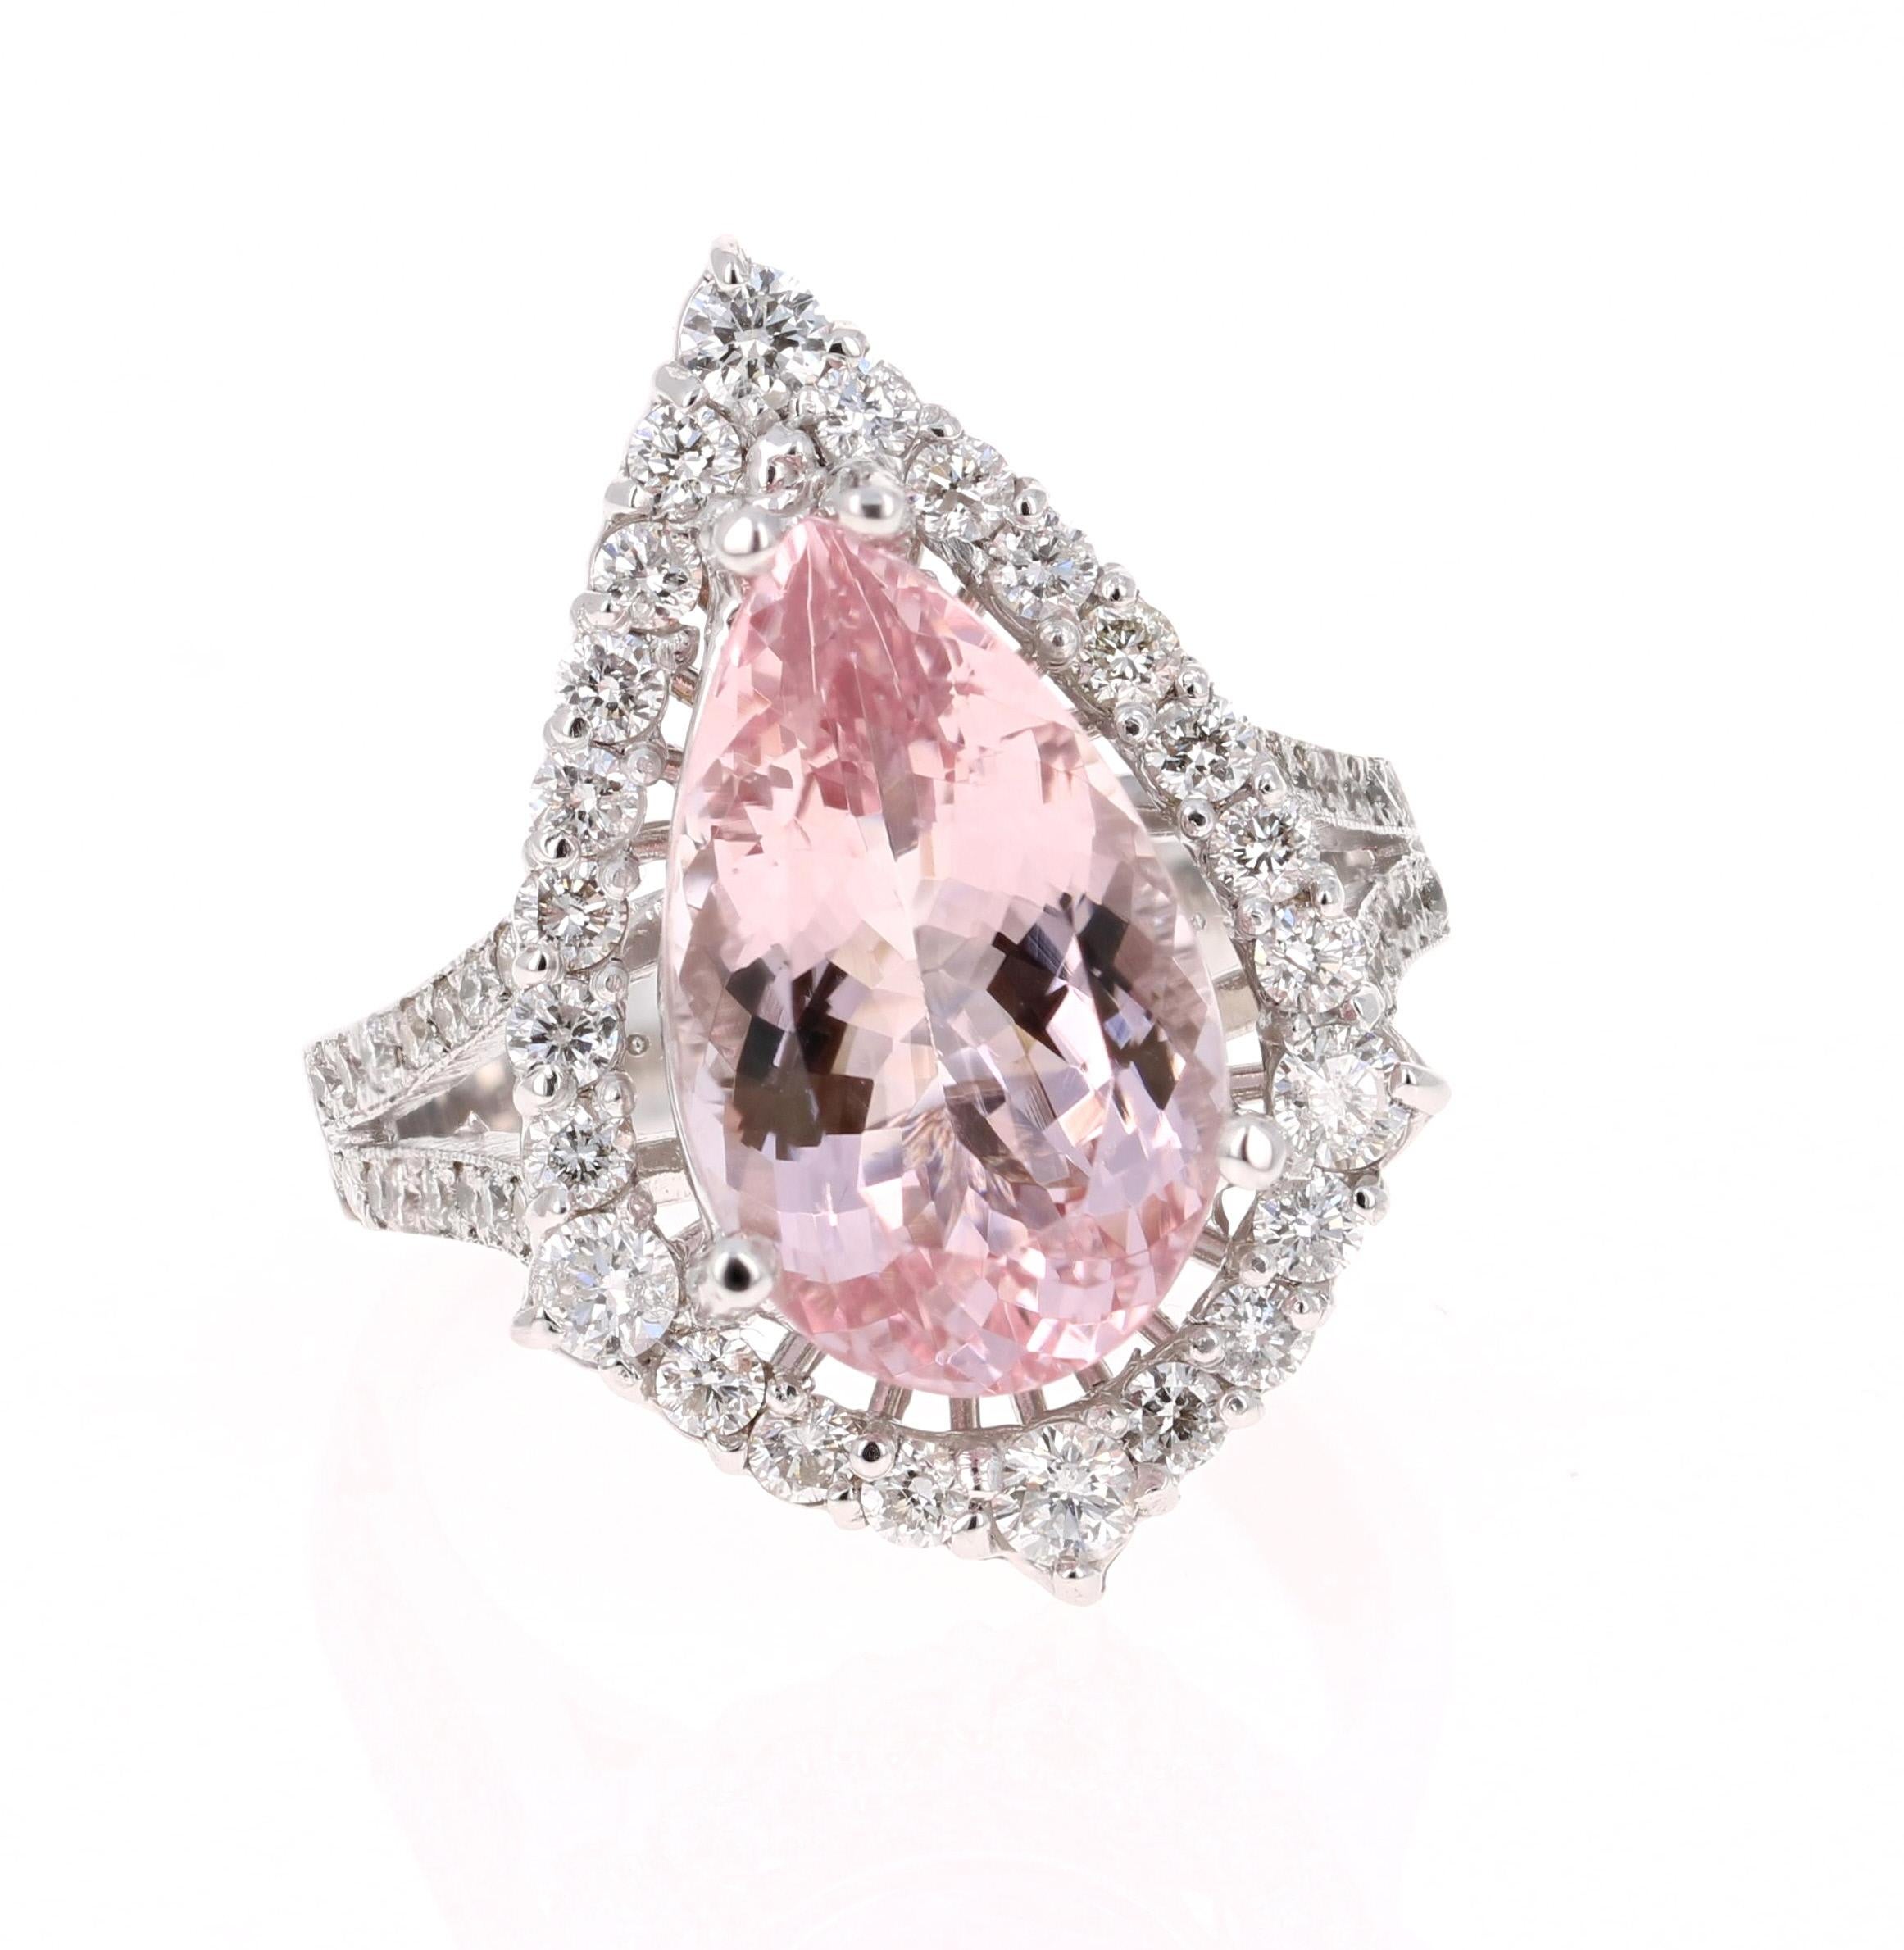 This Morganite ring has a gorgeous 5.16 Carat Pear Cut Pink Morganite and is surrounded by 52 Round Cut Diamonds that weigh 1.02 Carats. The diamonds have a clarity and color of SI-F. The total carat weight of the ring is 6.18 Carats. 

The